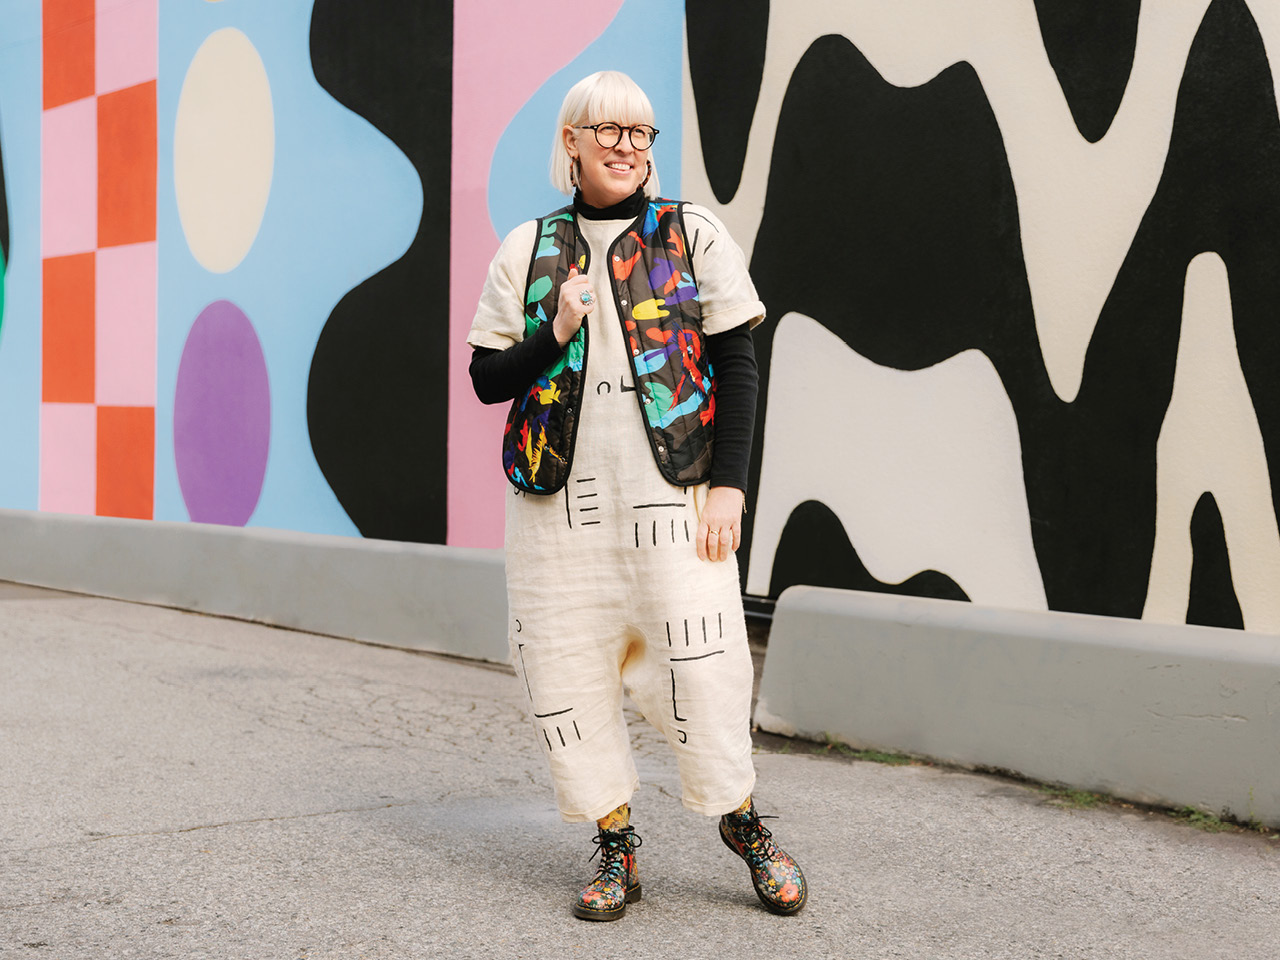 Vancouver entrepreneur Anna Heyd wearing a maximalist style outfit including a patterned white jumpsuit and a black vest with graphic shapes, photographed against a murale.